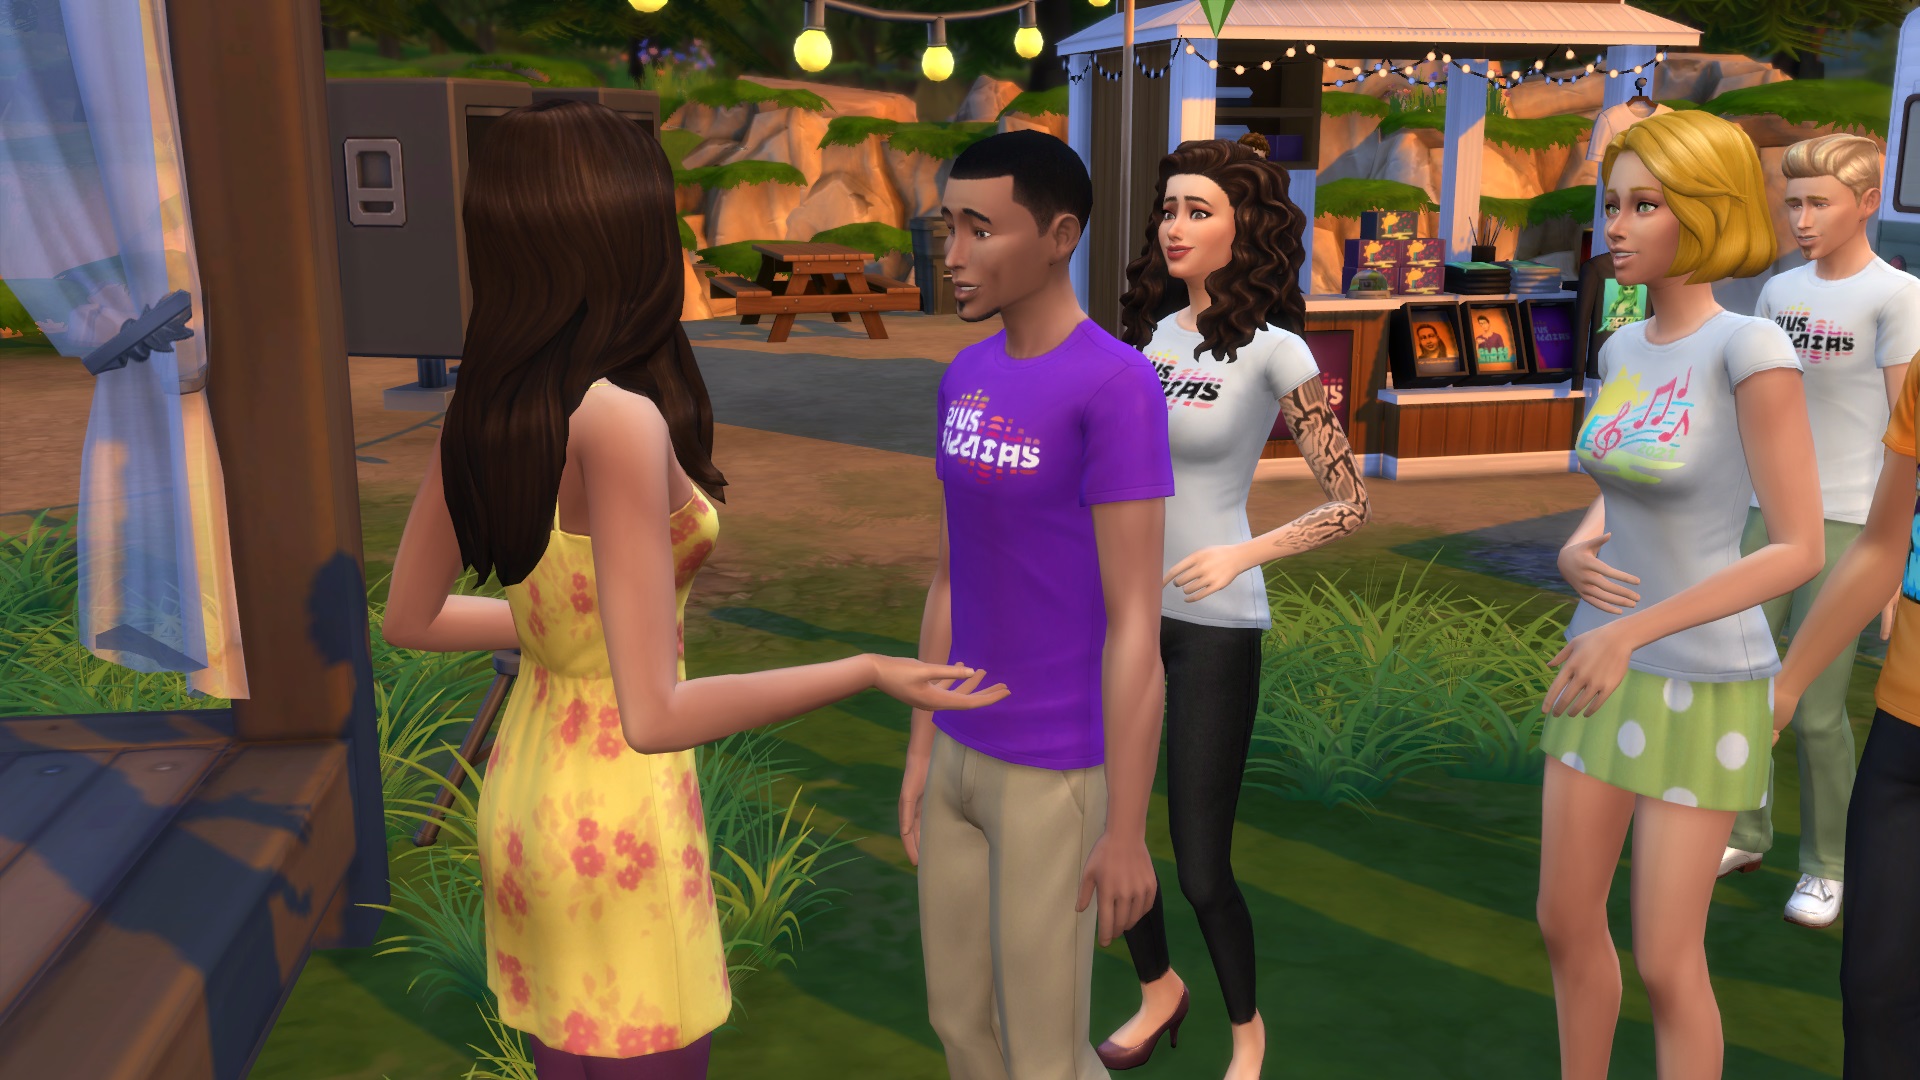 Female sim with long brown hair and yellow dress talking to male sim with purple t-shirt. Another female Sim, with curly brown hair and wearing a tshirt and jeans is trying to talk to the first female but the man stands between them.